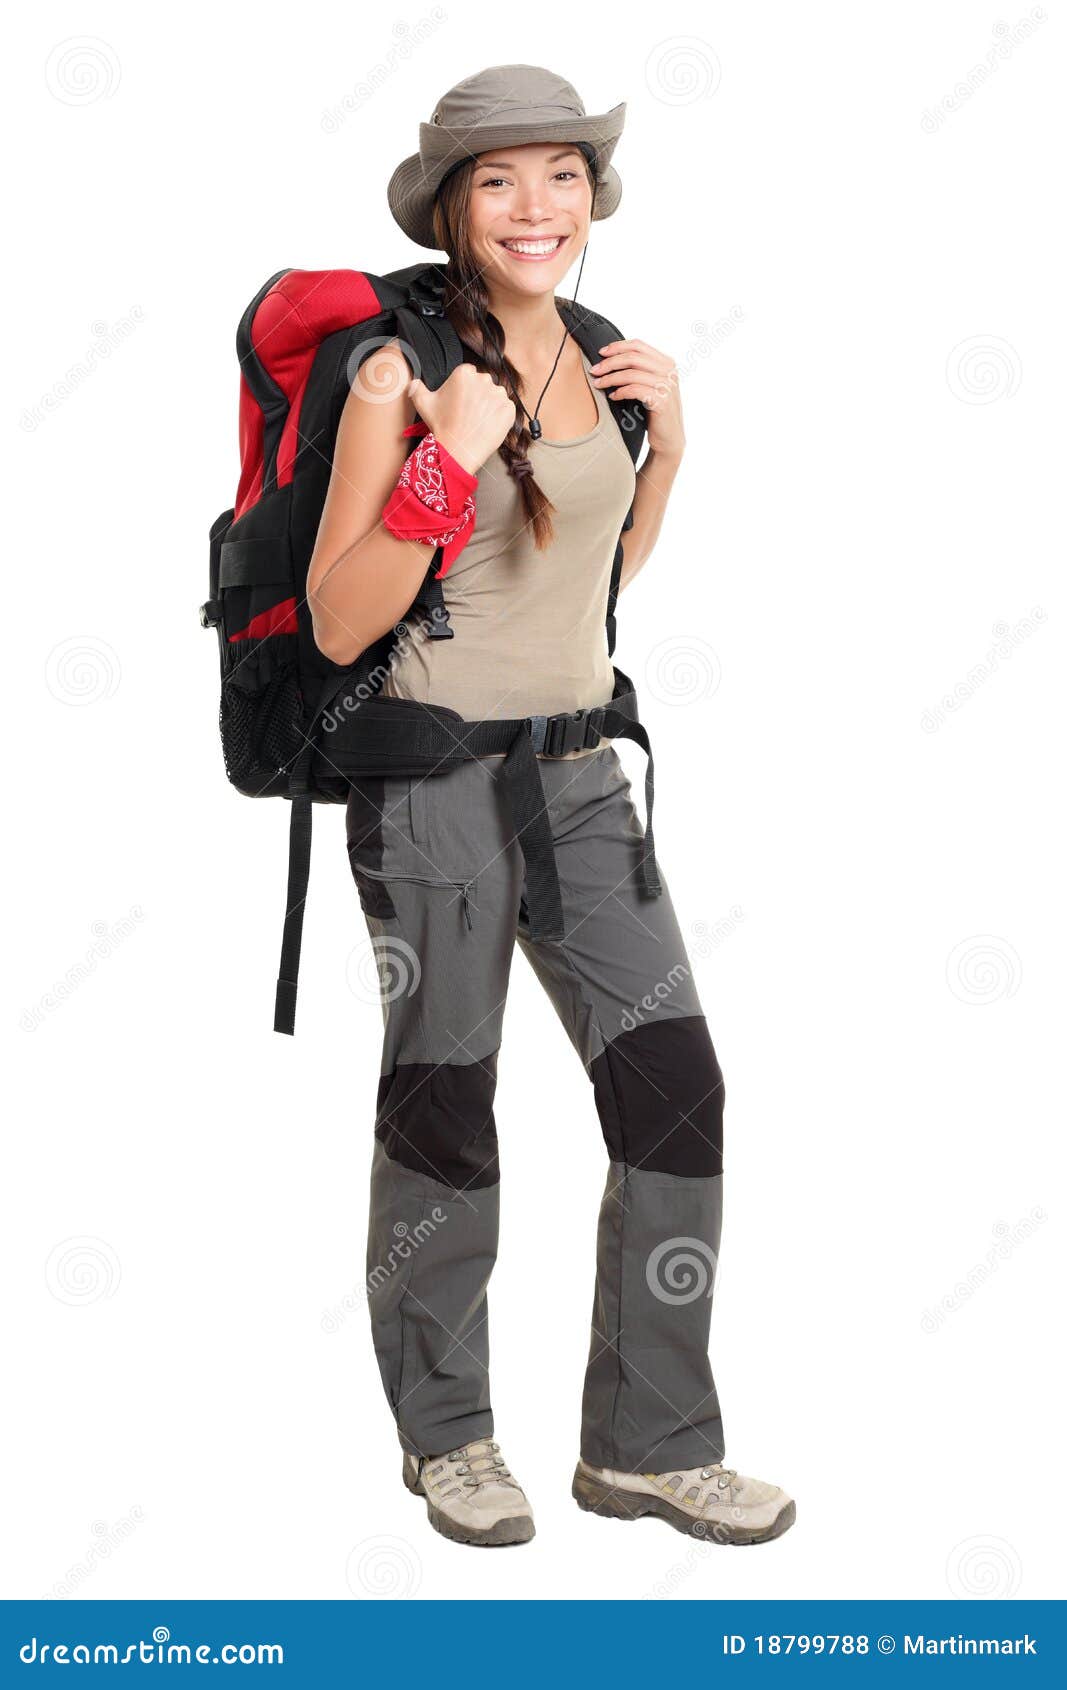 Hiker woman isolated stock photo. Image of indoors, model - 18799788